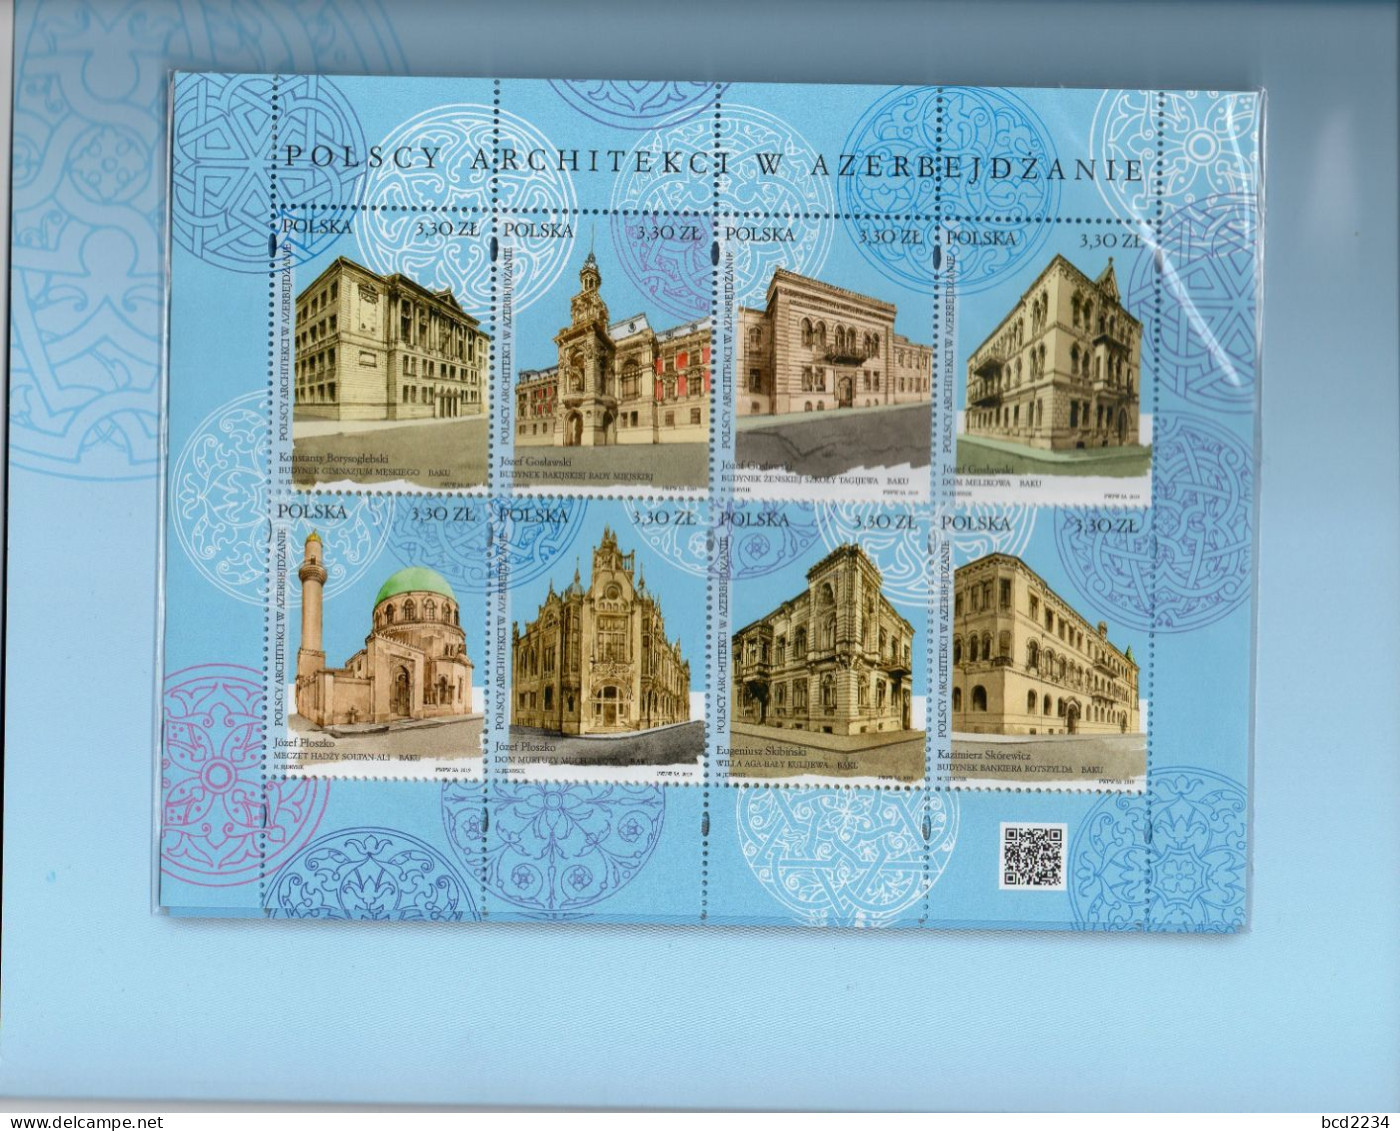 POLAND 2019 POLISH POST OFFICE SPECIAL LIMITED EDITION FOLDER: POLISH ARCHITECTS IN  BAKU AZERBAIJAN ARCHITECTURES SHEET - Blocs & Feuillets